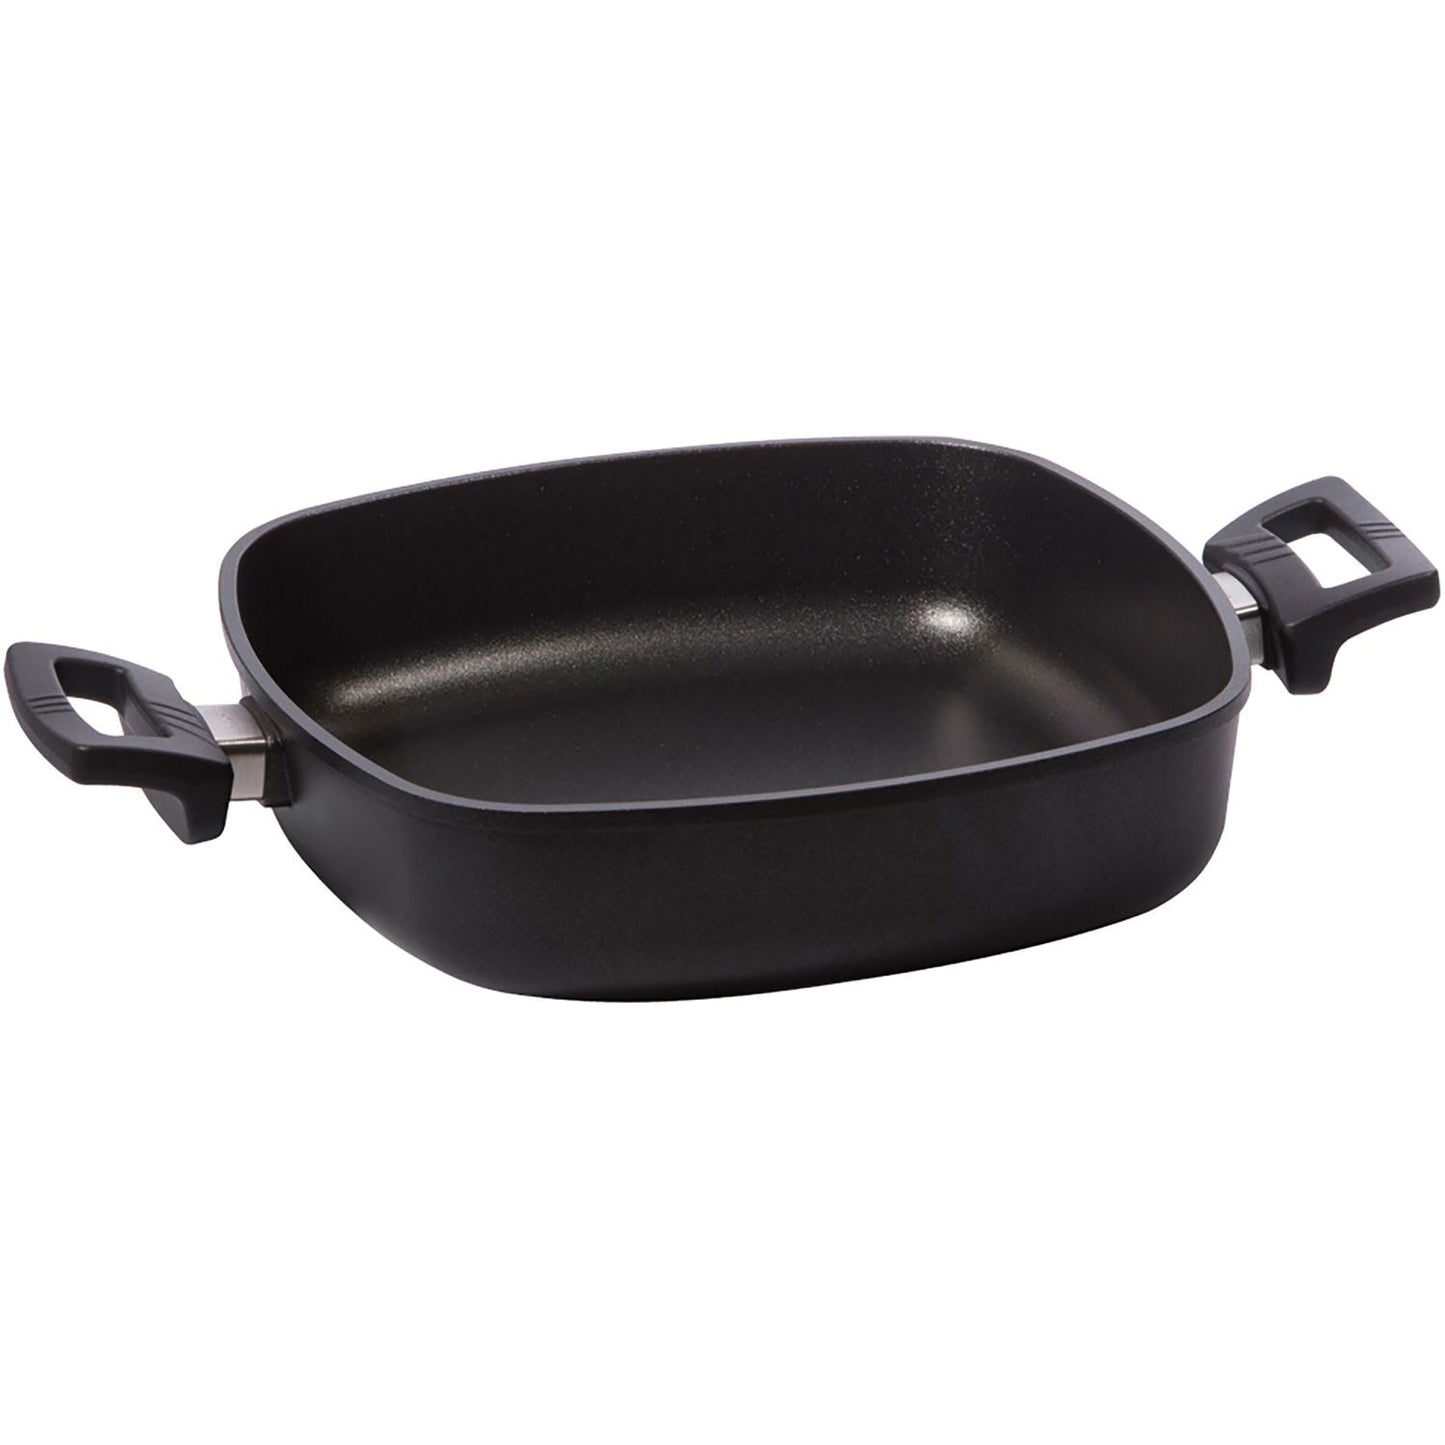 Eurolux Premium casserole dish 28 x 28 cm, 7 cm H, 4.0 L - Suitable for Induction, Made in Germany